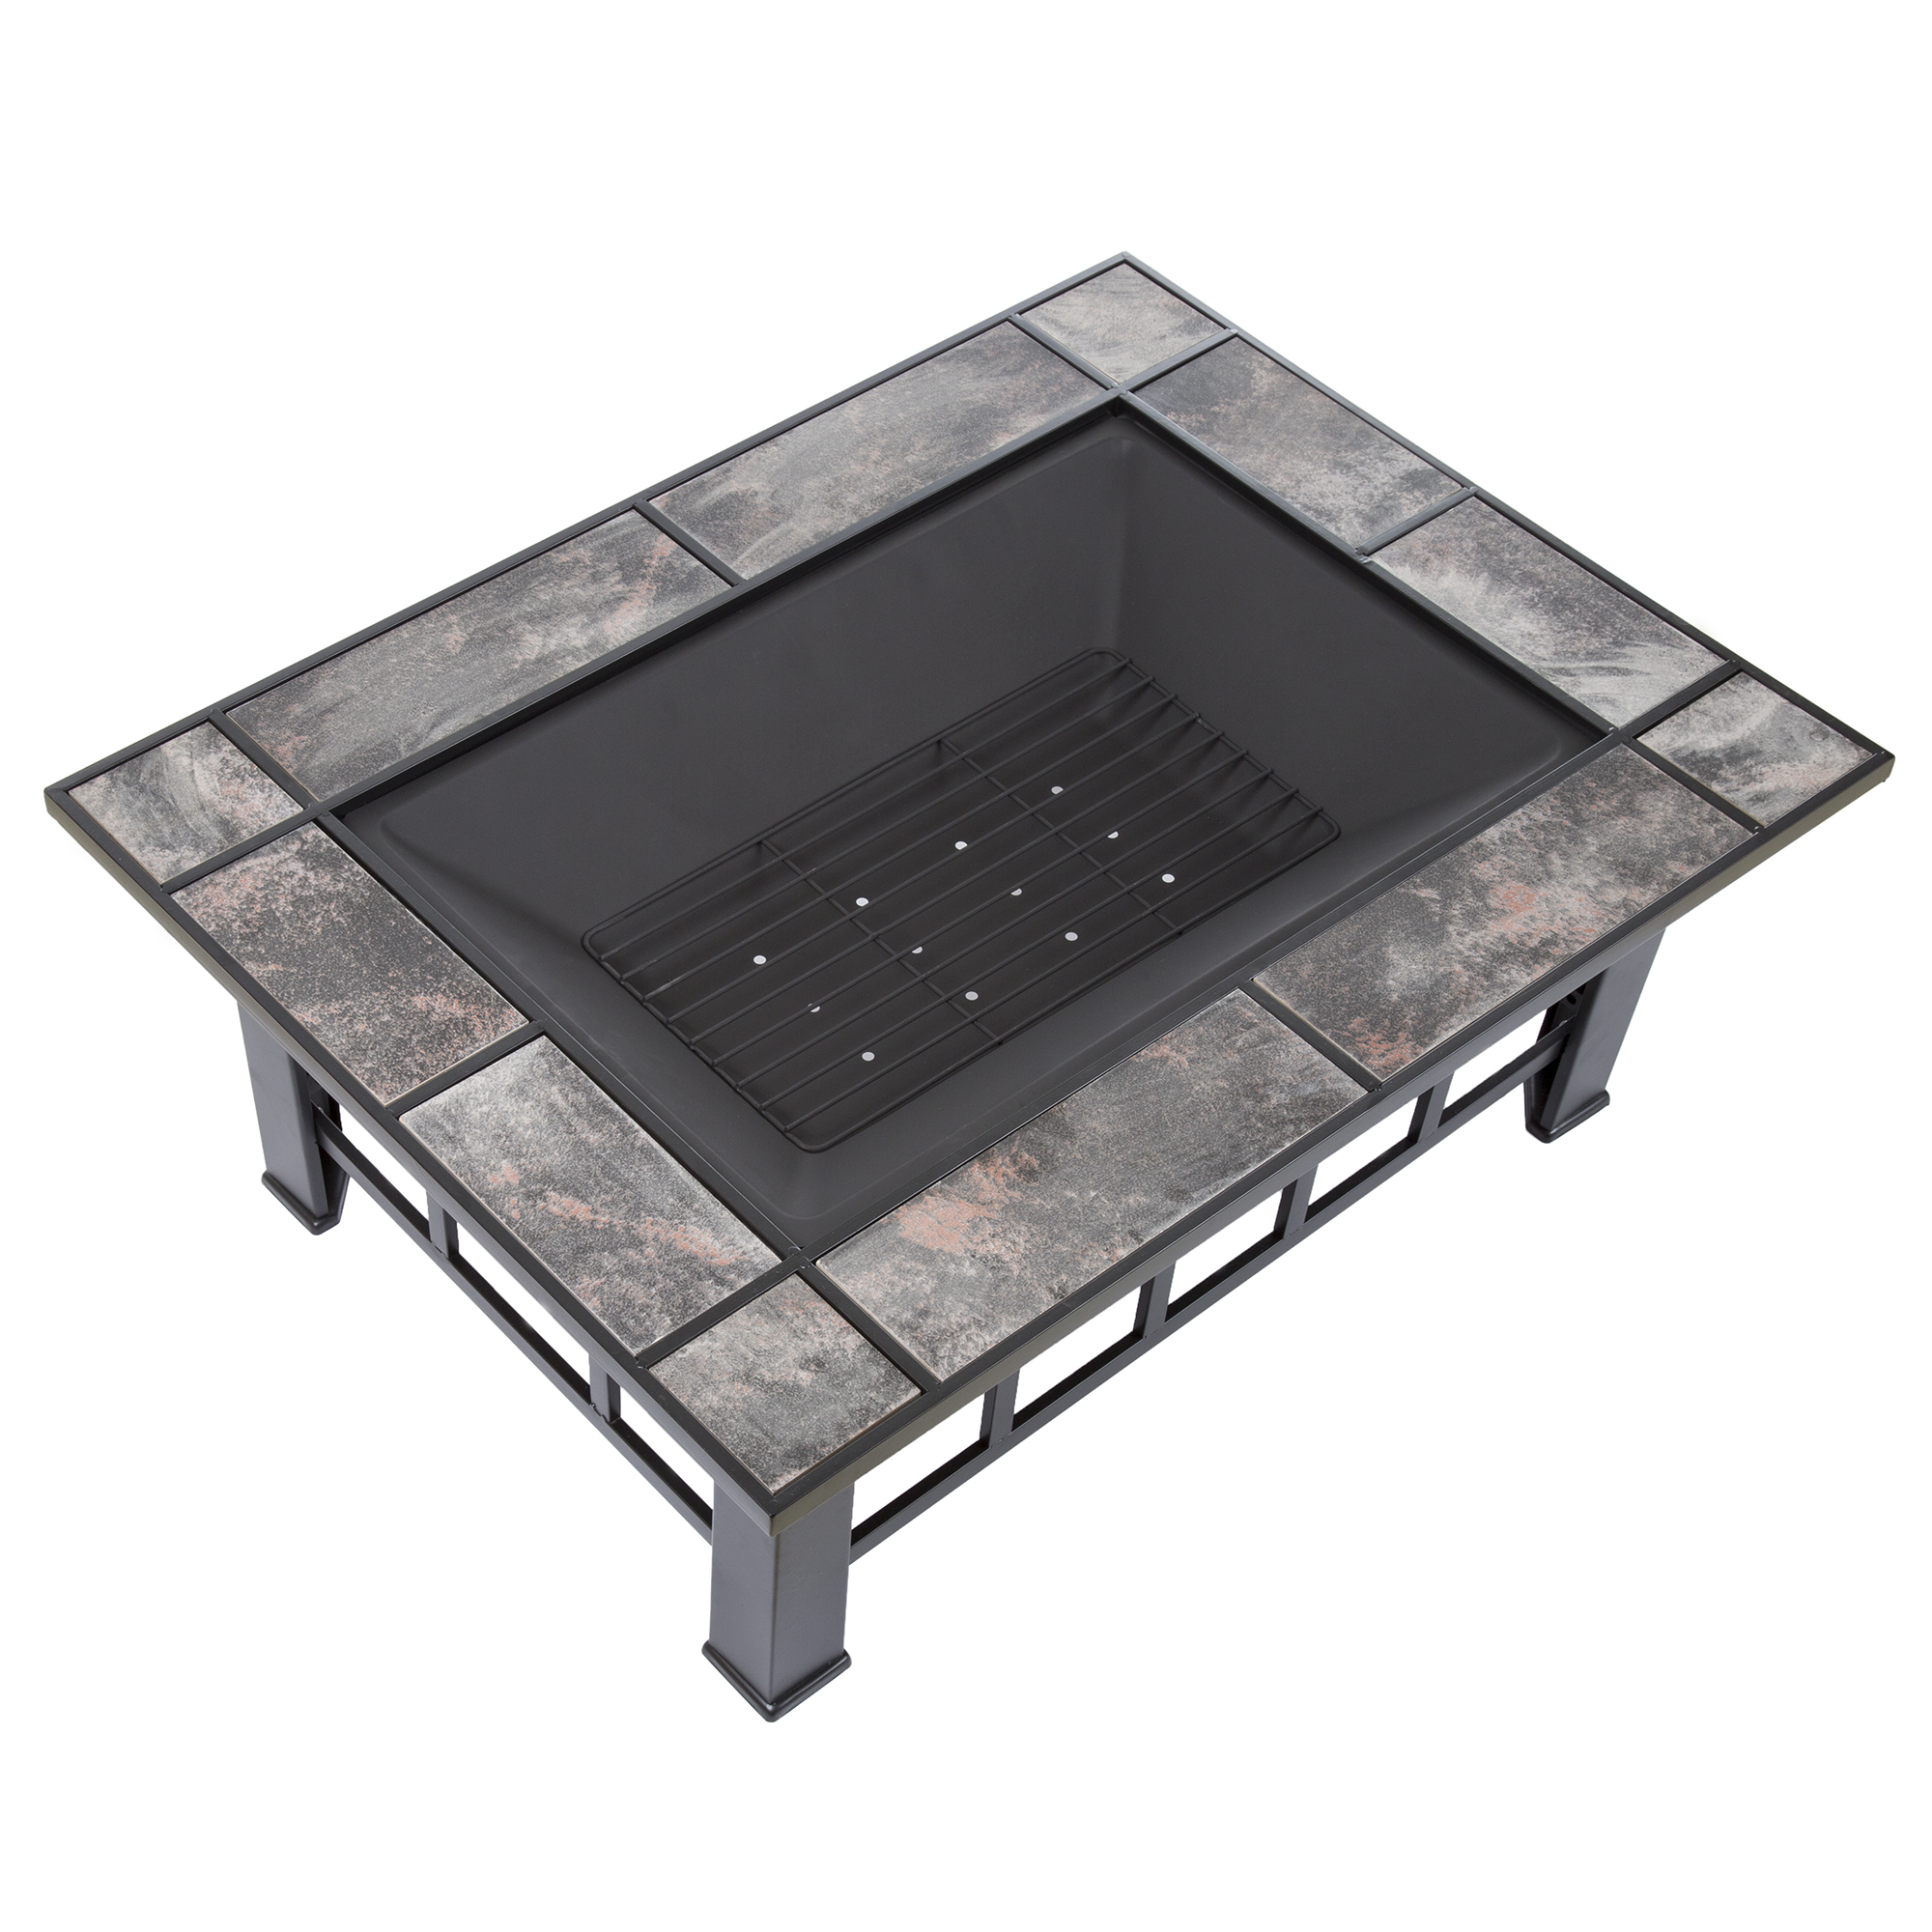 Pure Garden Fire Pit Set, Wood Burning Pit - Includes Screen, Cover and Log Poker - Great for Outdoor and Patio, 37" Marble Tile Rectangular Firepit - image 3 of 7